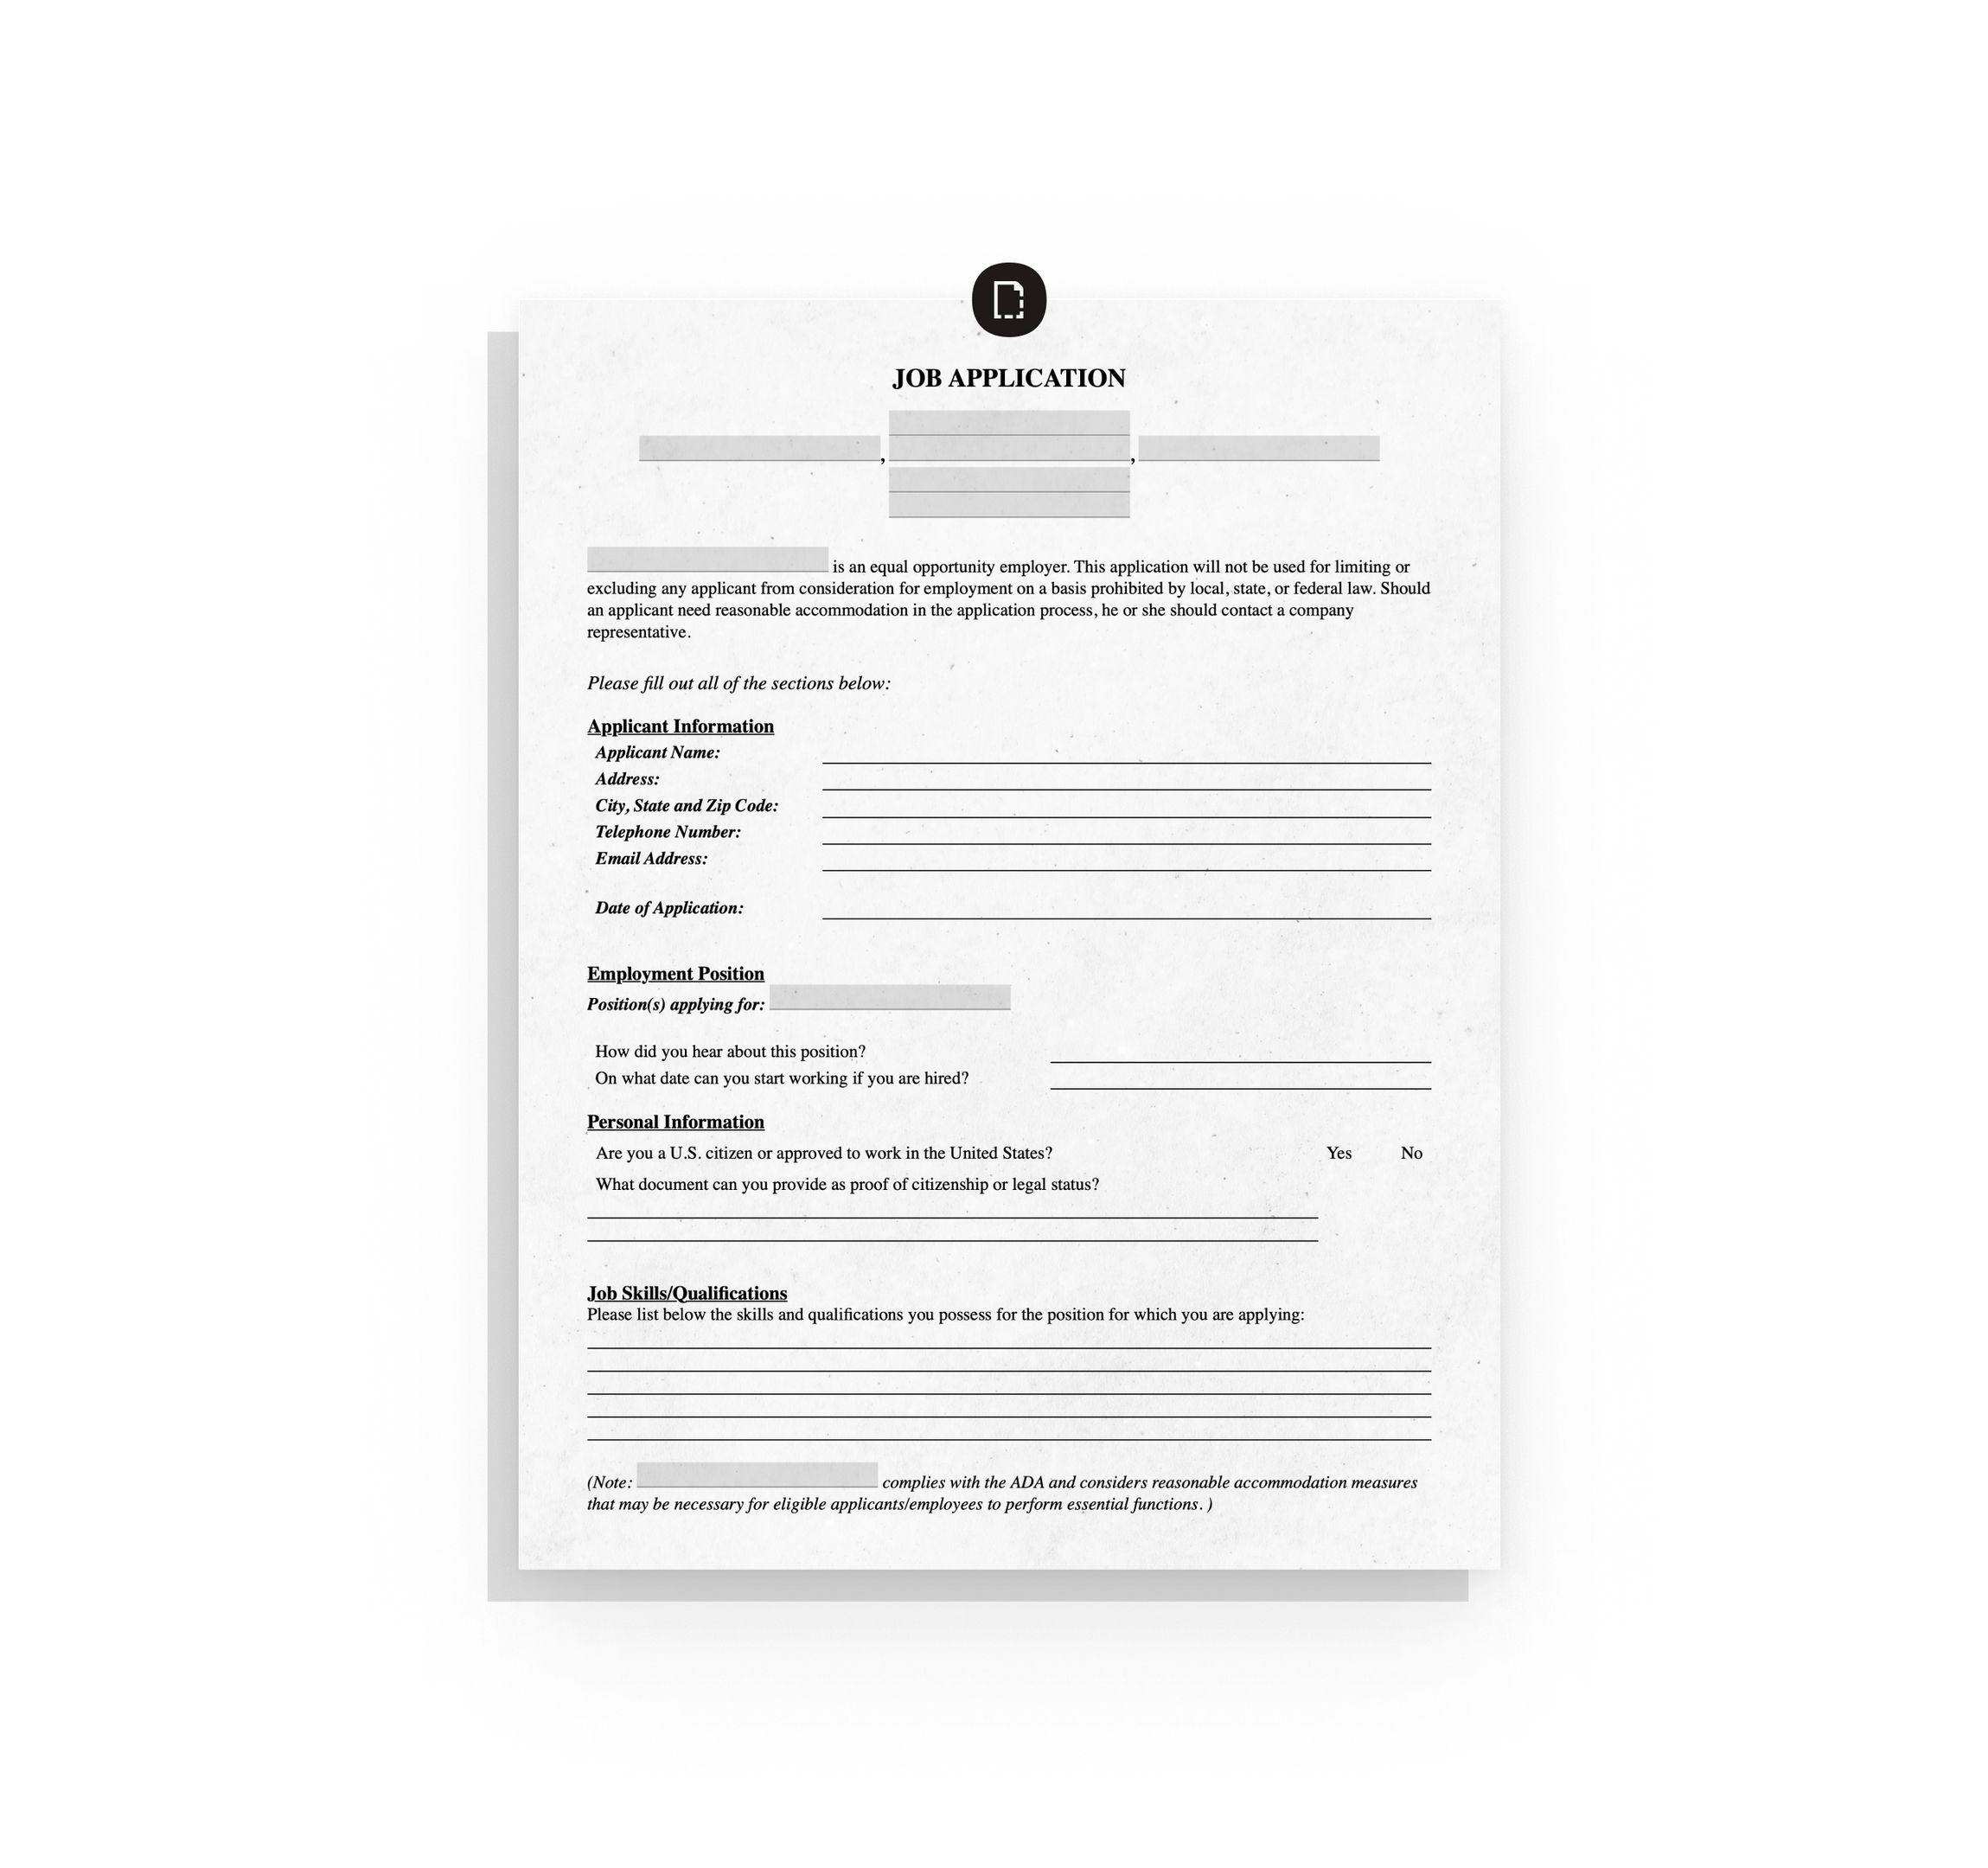 An example of a job application form